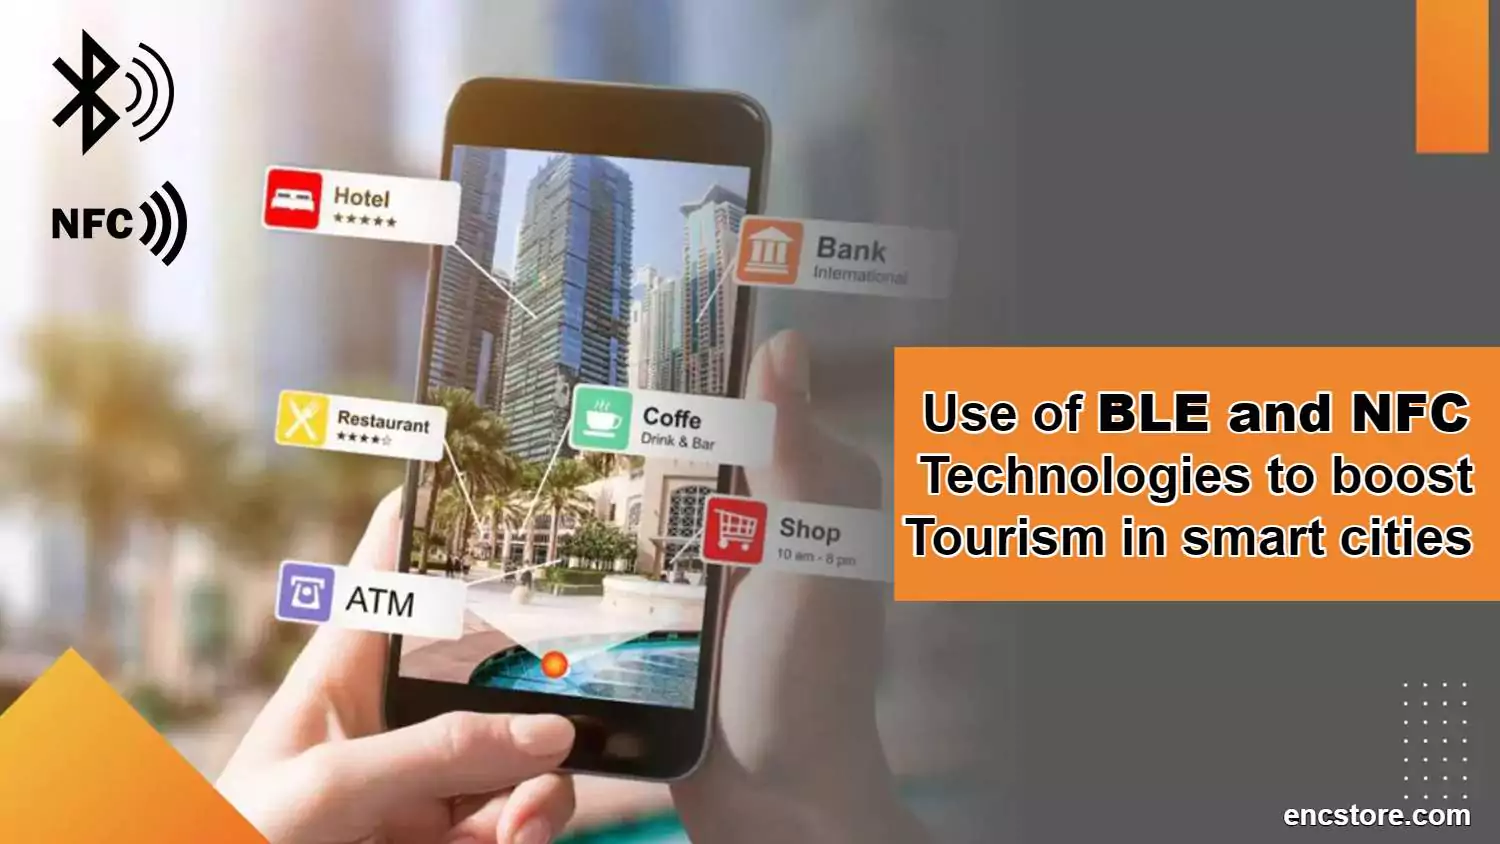 Use of BLE and NFC in tourism sector